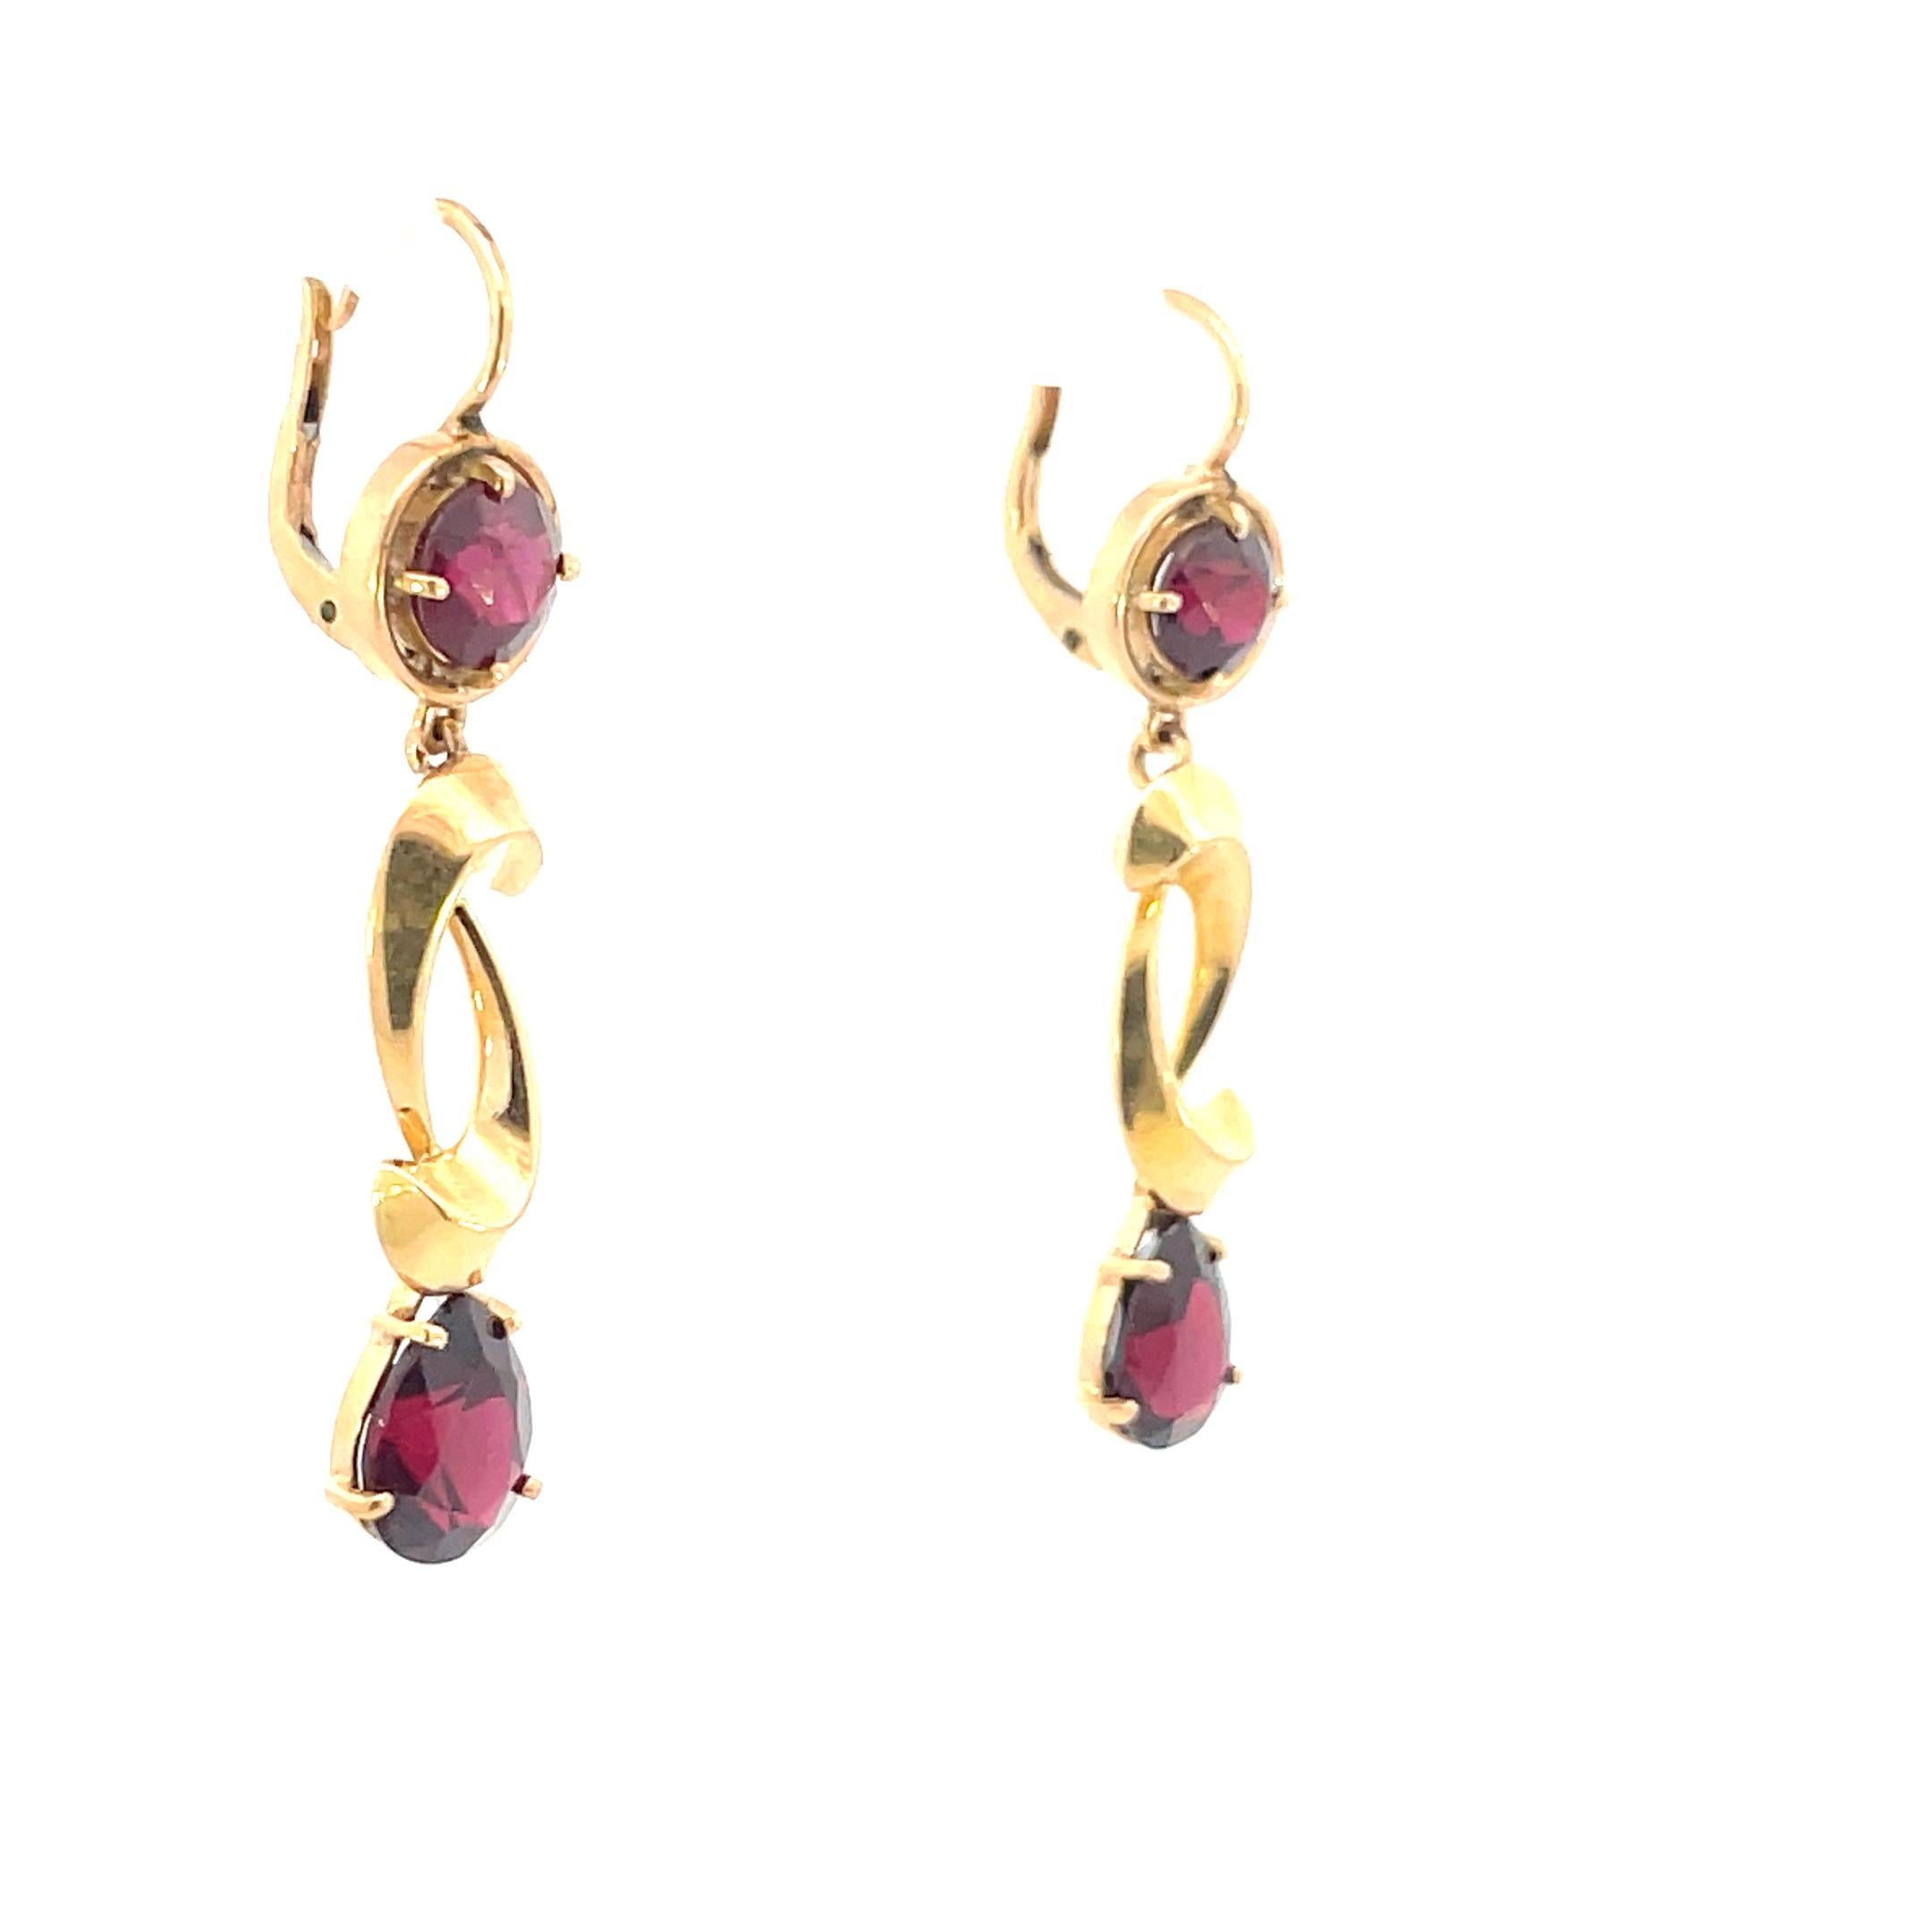 Retro 18K Yellow Gold and Garnet Drop Earrings  In Excellent Condition For Sale In Lexington, KY